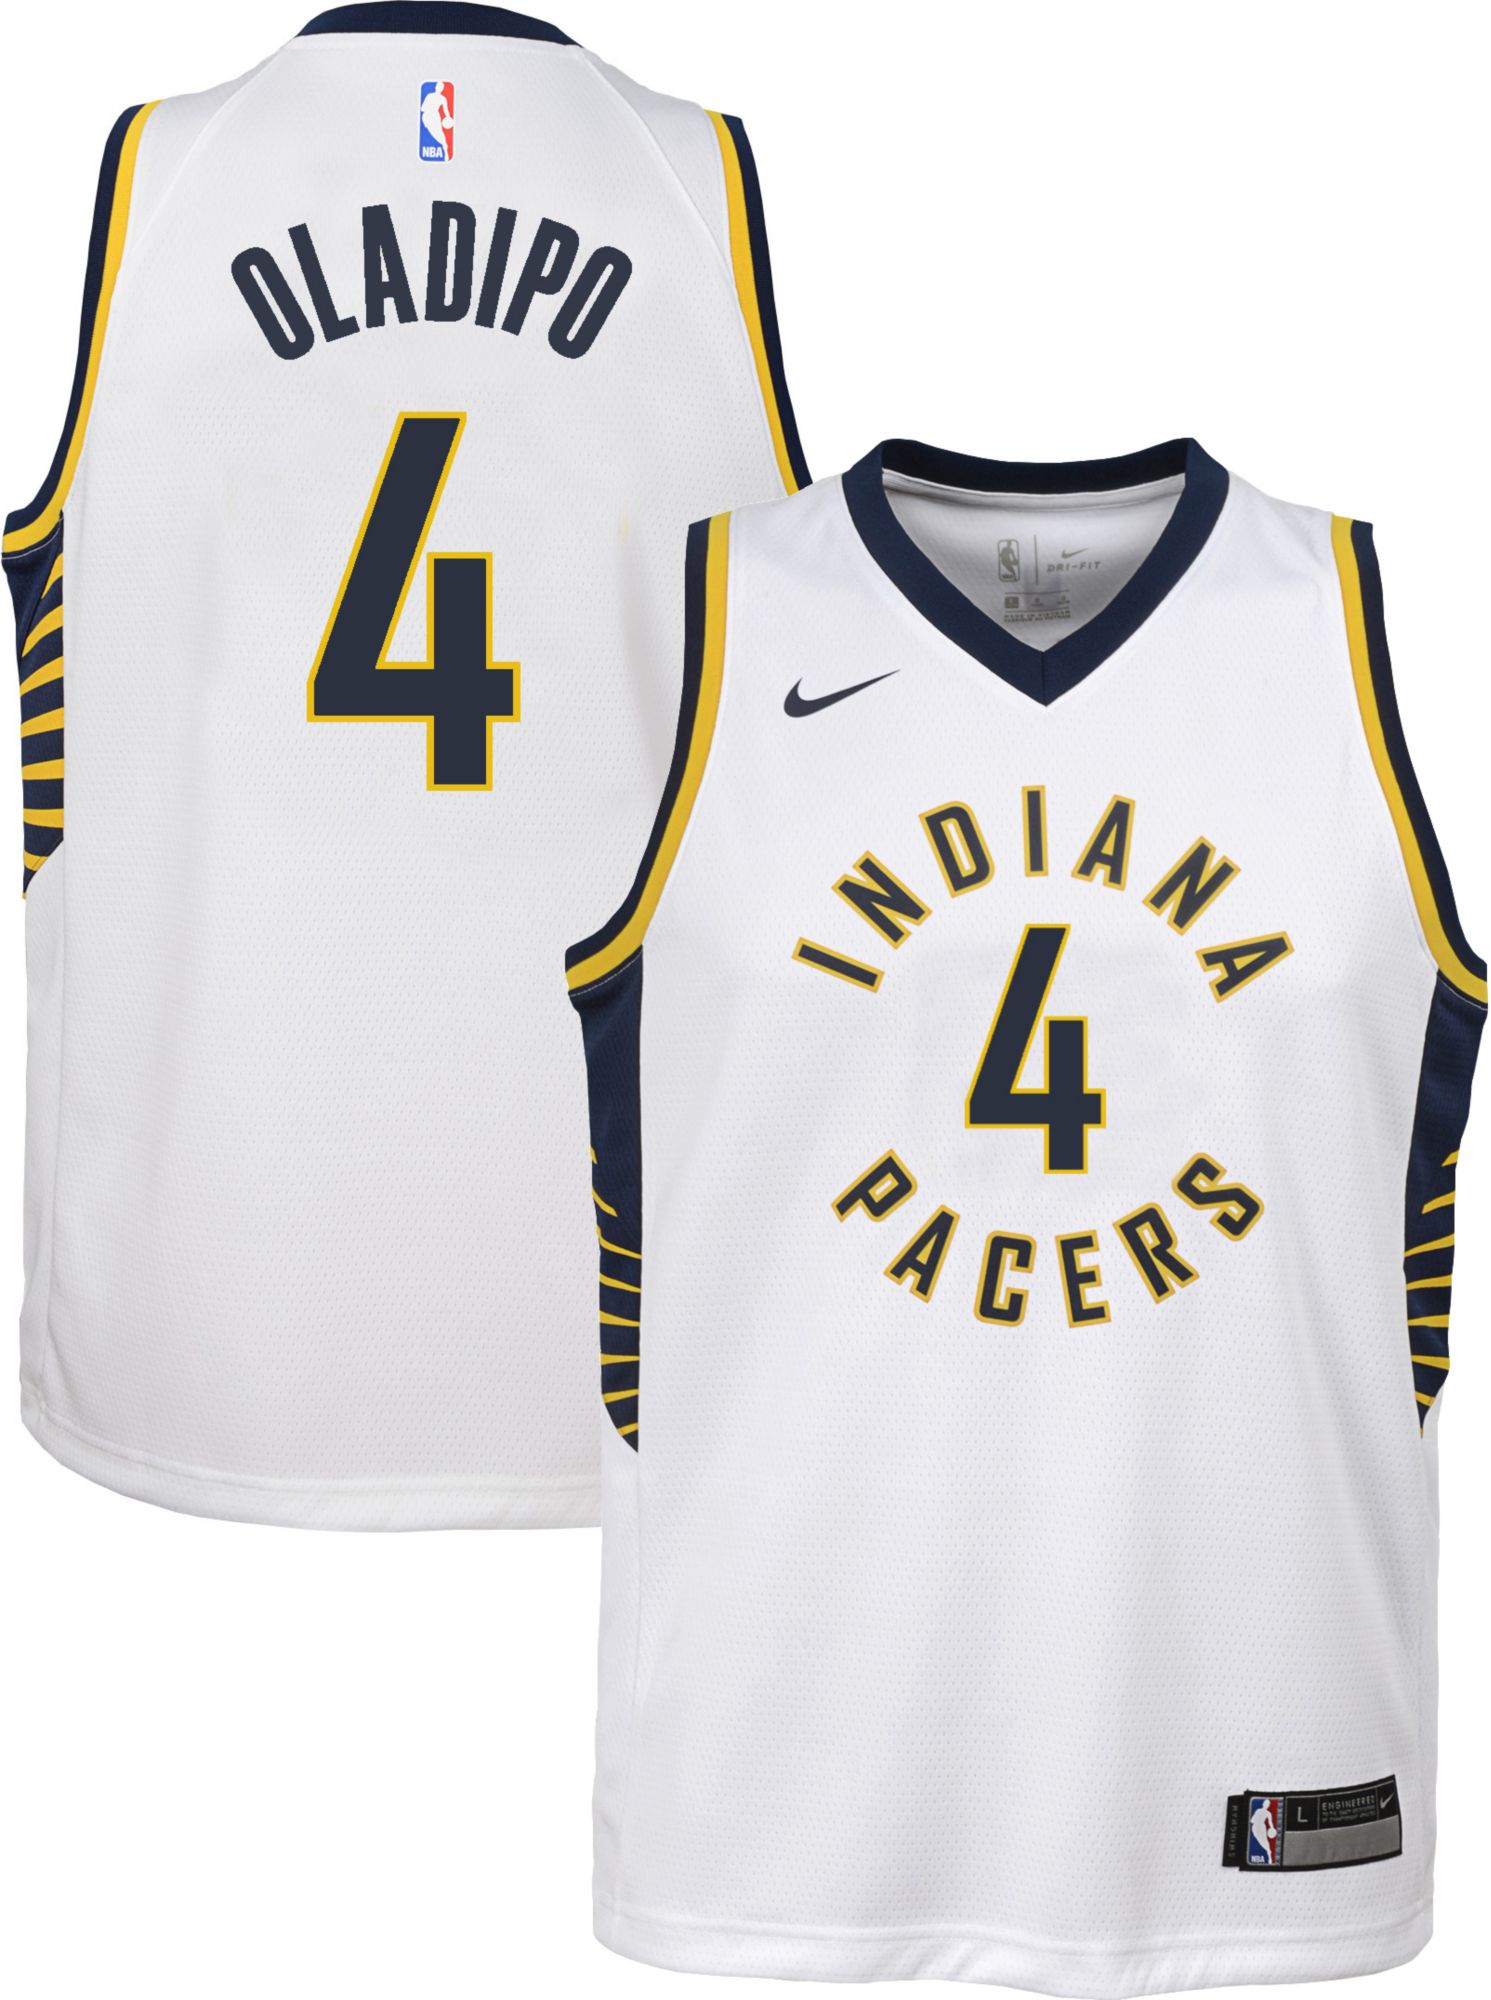 indiana pacers white jersey